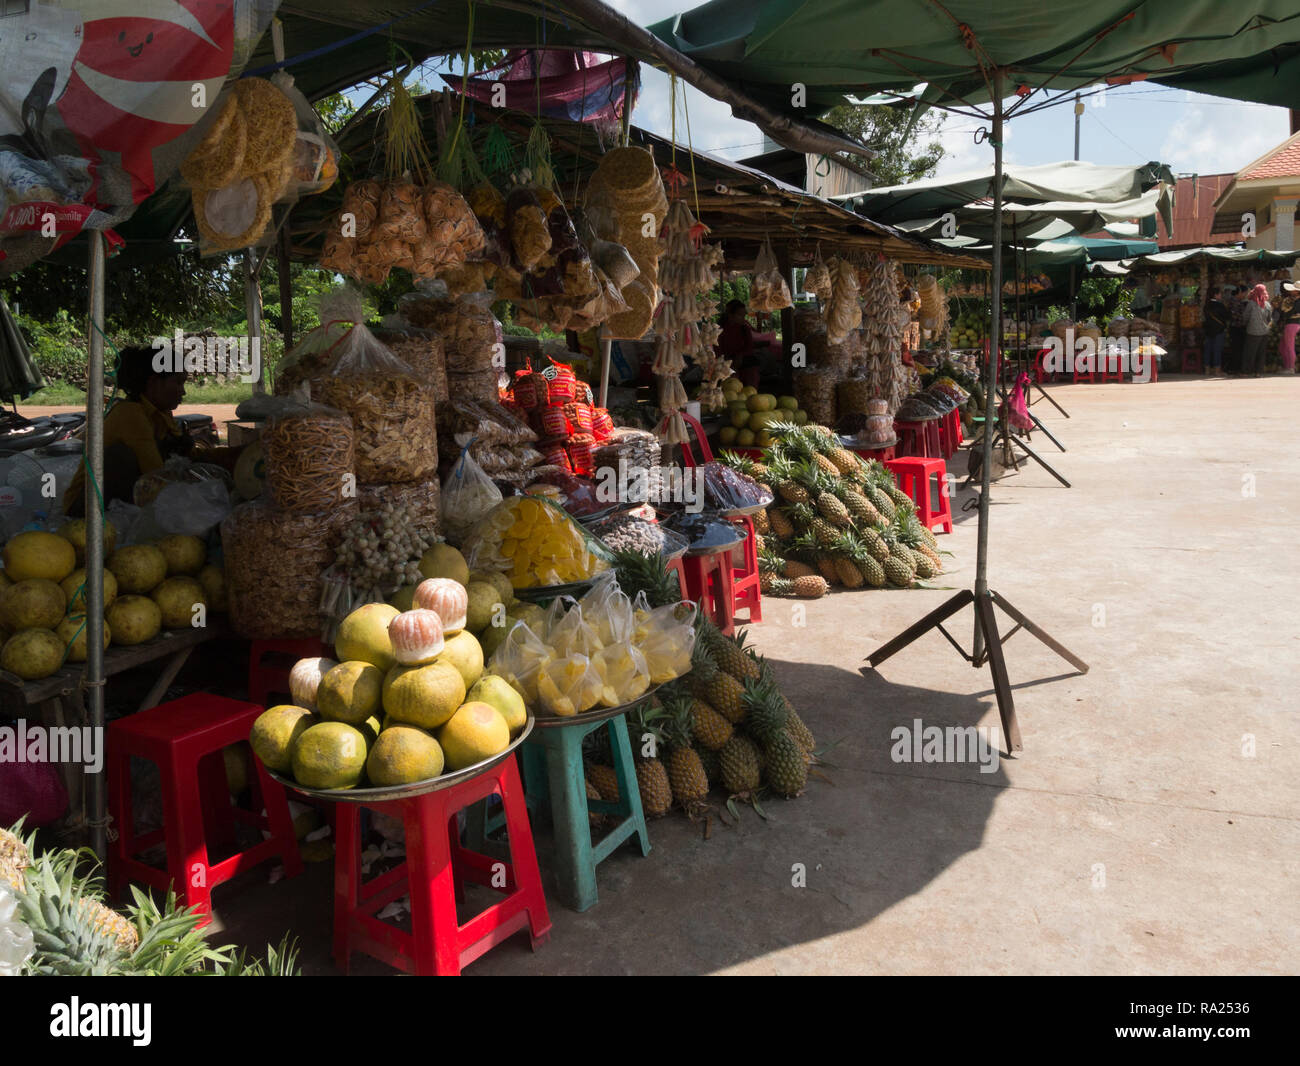 Stalls at Skuon Town Market selling dried and fresh fruit melons bananas dates pineapple mango and cashew nuts Cambodia Asia Stock Photo